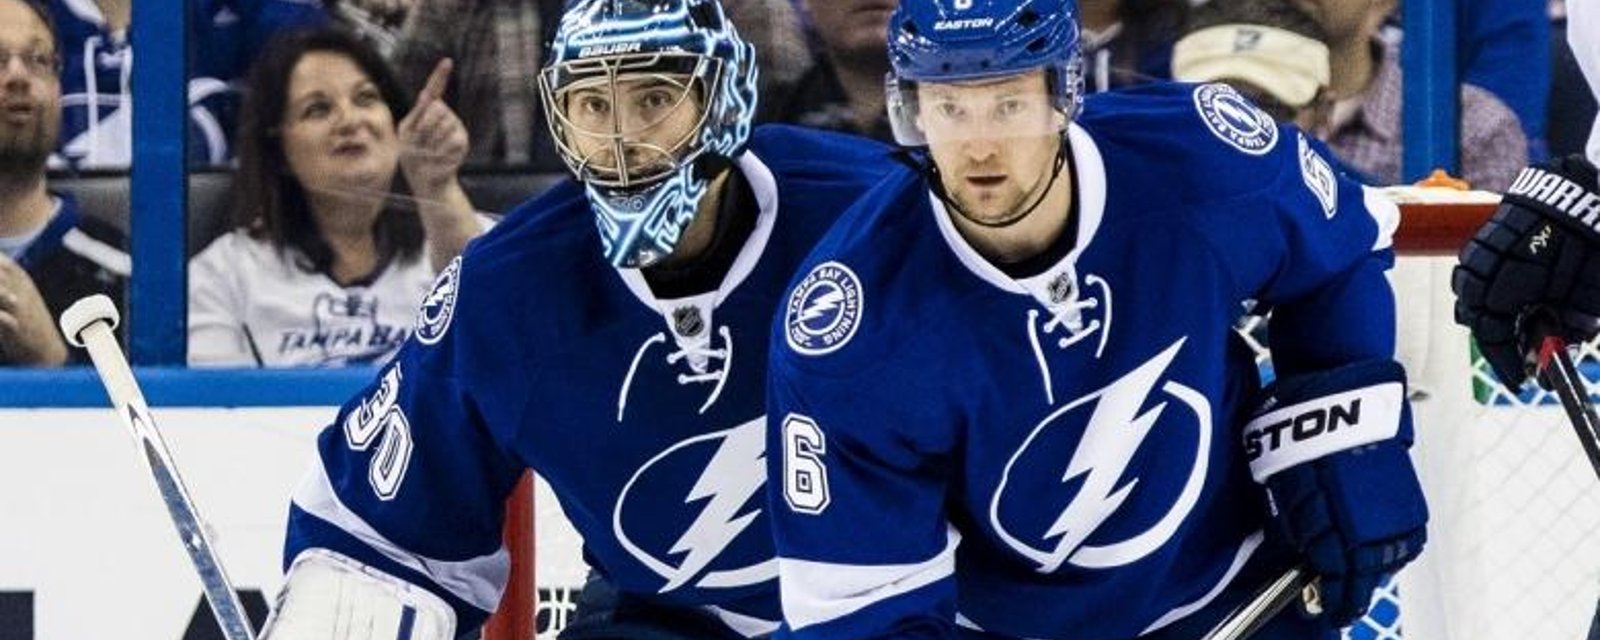 Lightning lose one of their top defenseman for the season and possibly more.